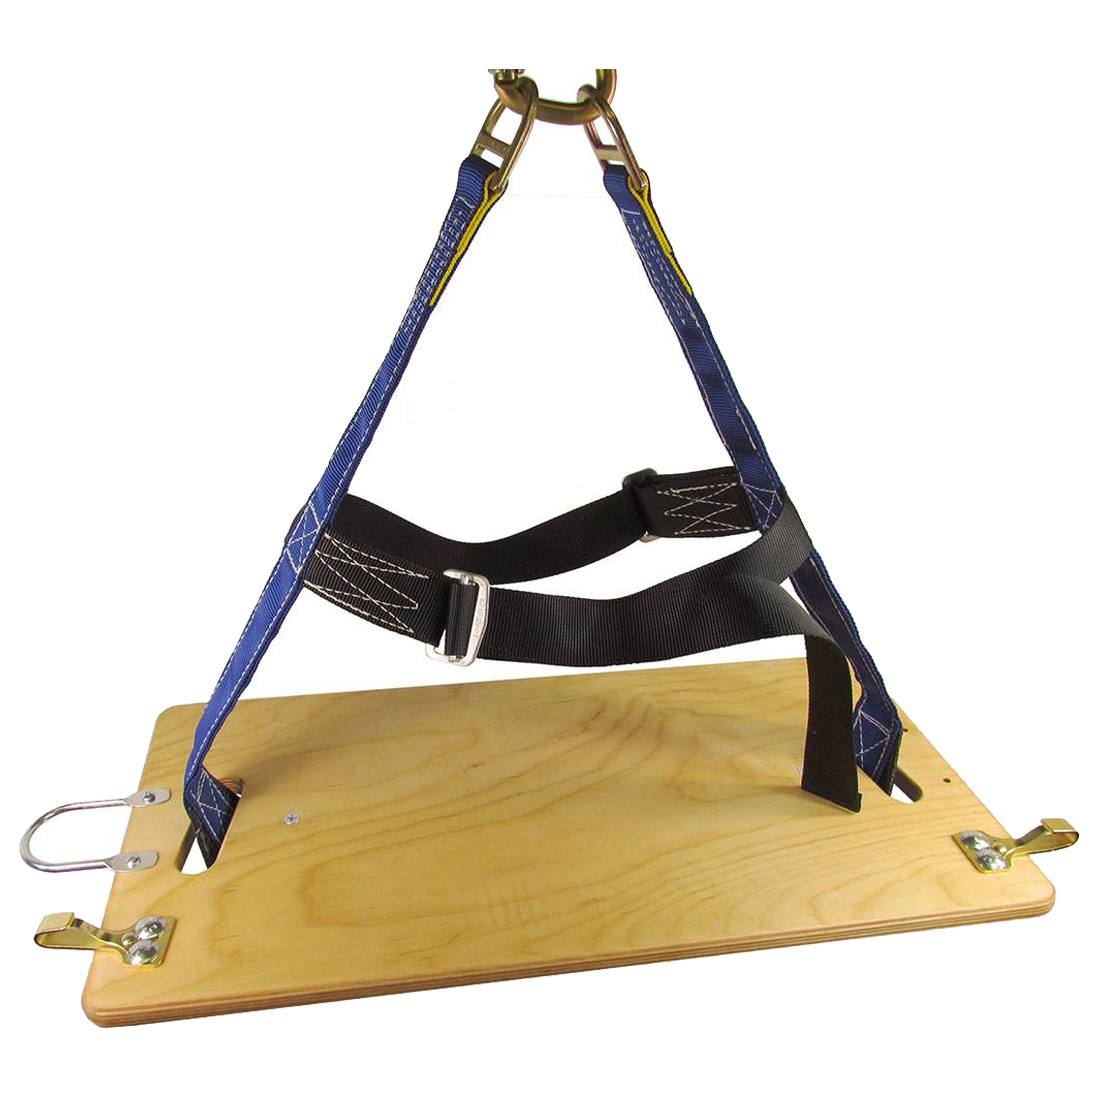 Sky Genie 2 Point Suspension Chair - with Waist Harness - Oblique Front View